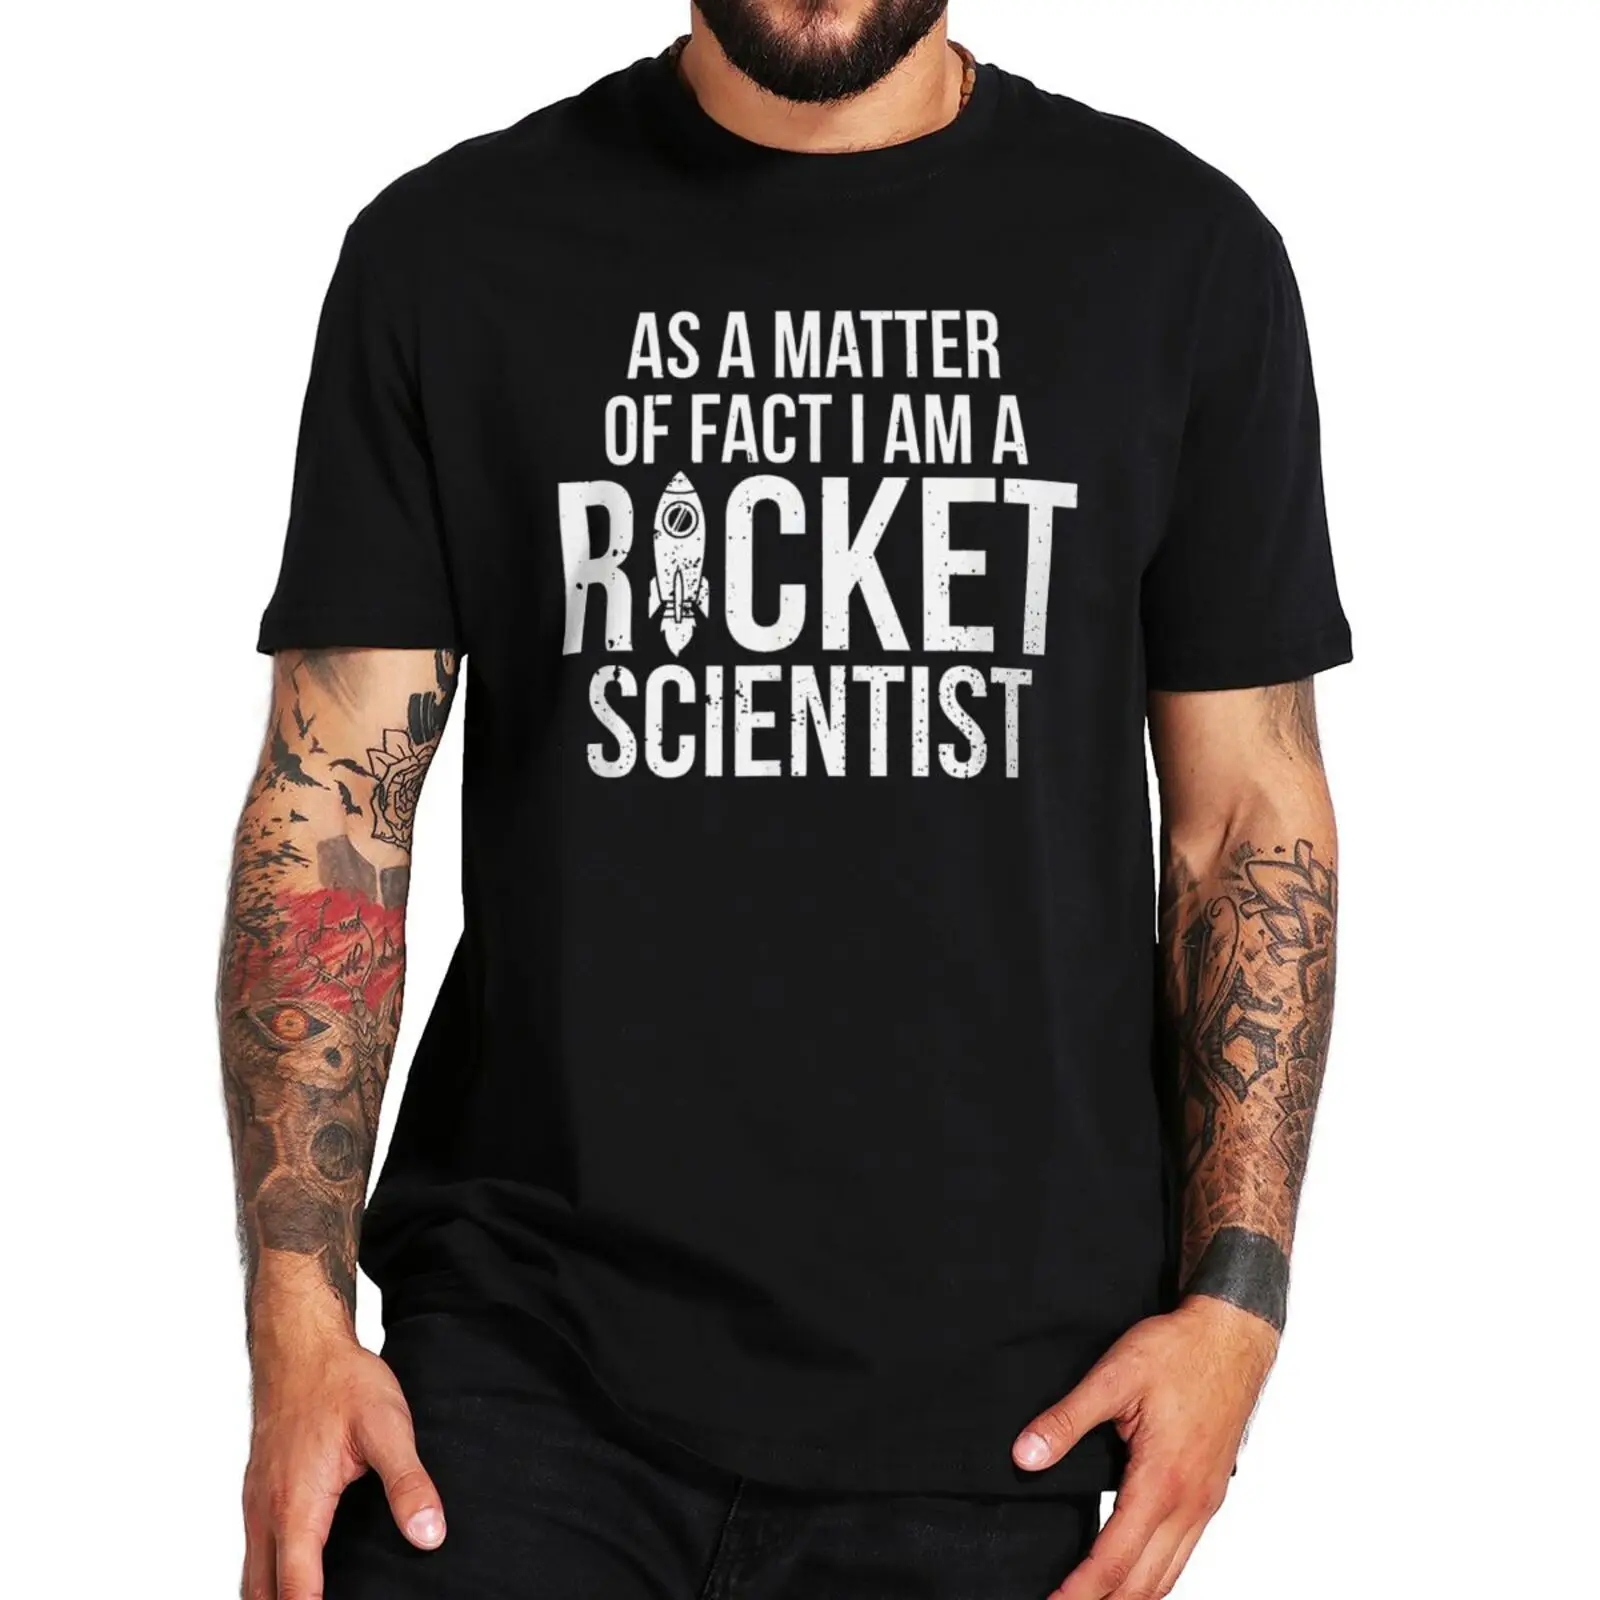 

As A Matter Of Fact I Am A Rocket Scientist T Shirt Funny Rocket Science Gift Men Clothing Premium Soft 100% Cotton Tshirt